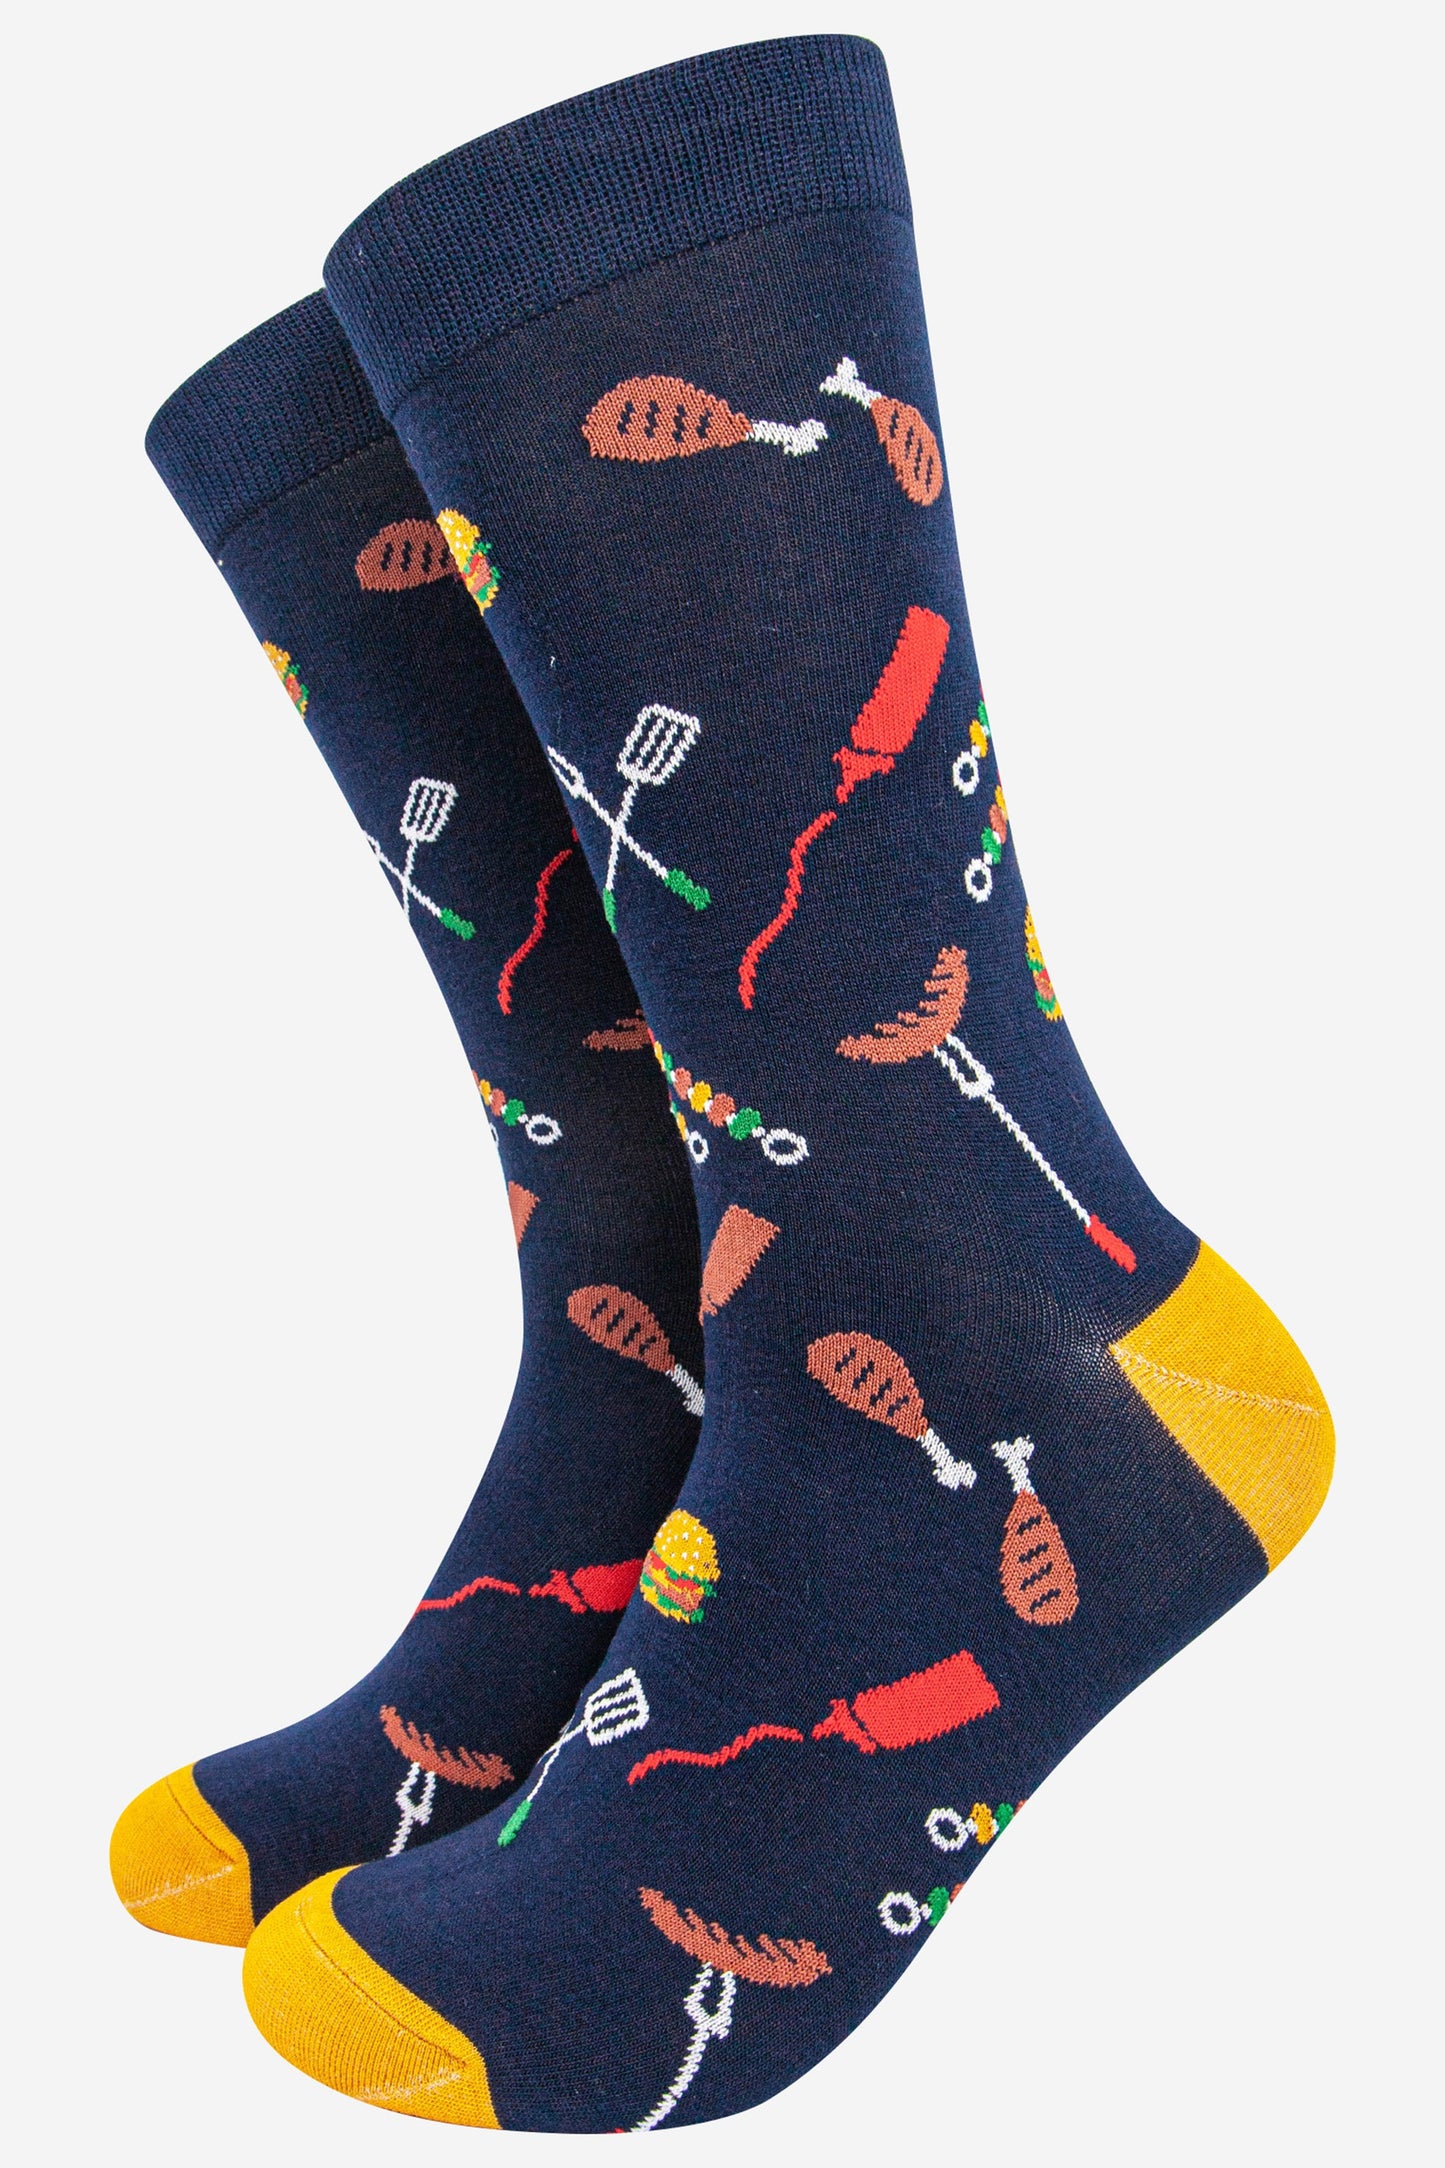 navy blue dress socks featuring a bbq grill with kebabs and burgers